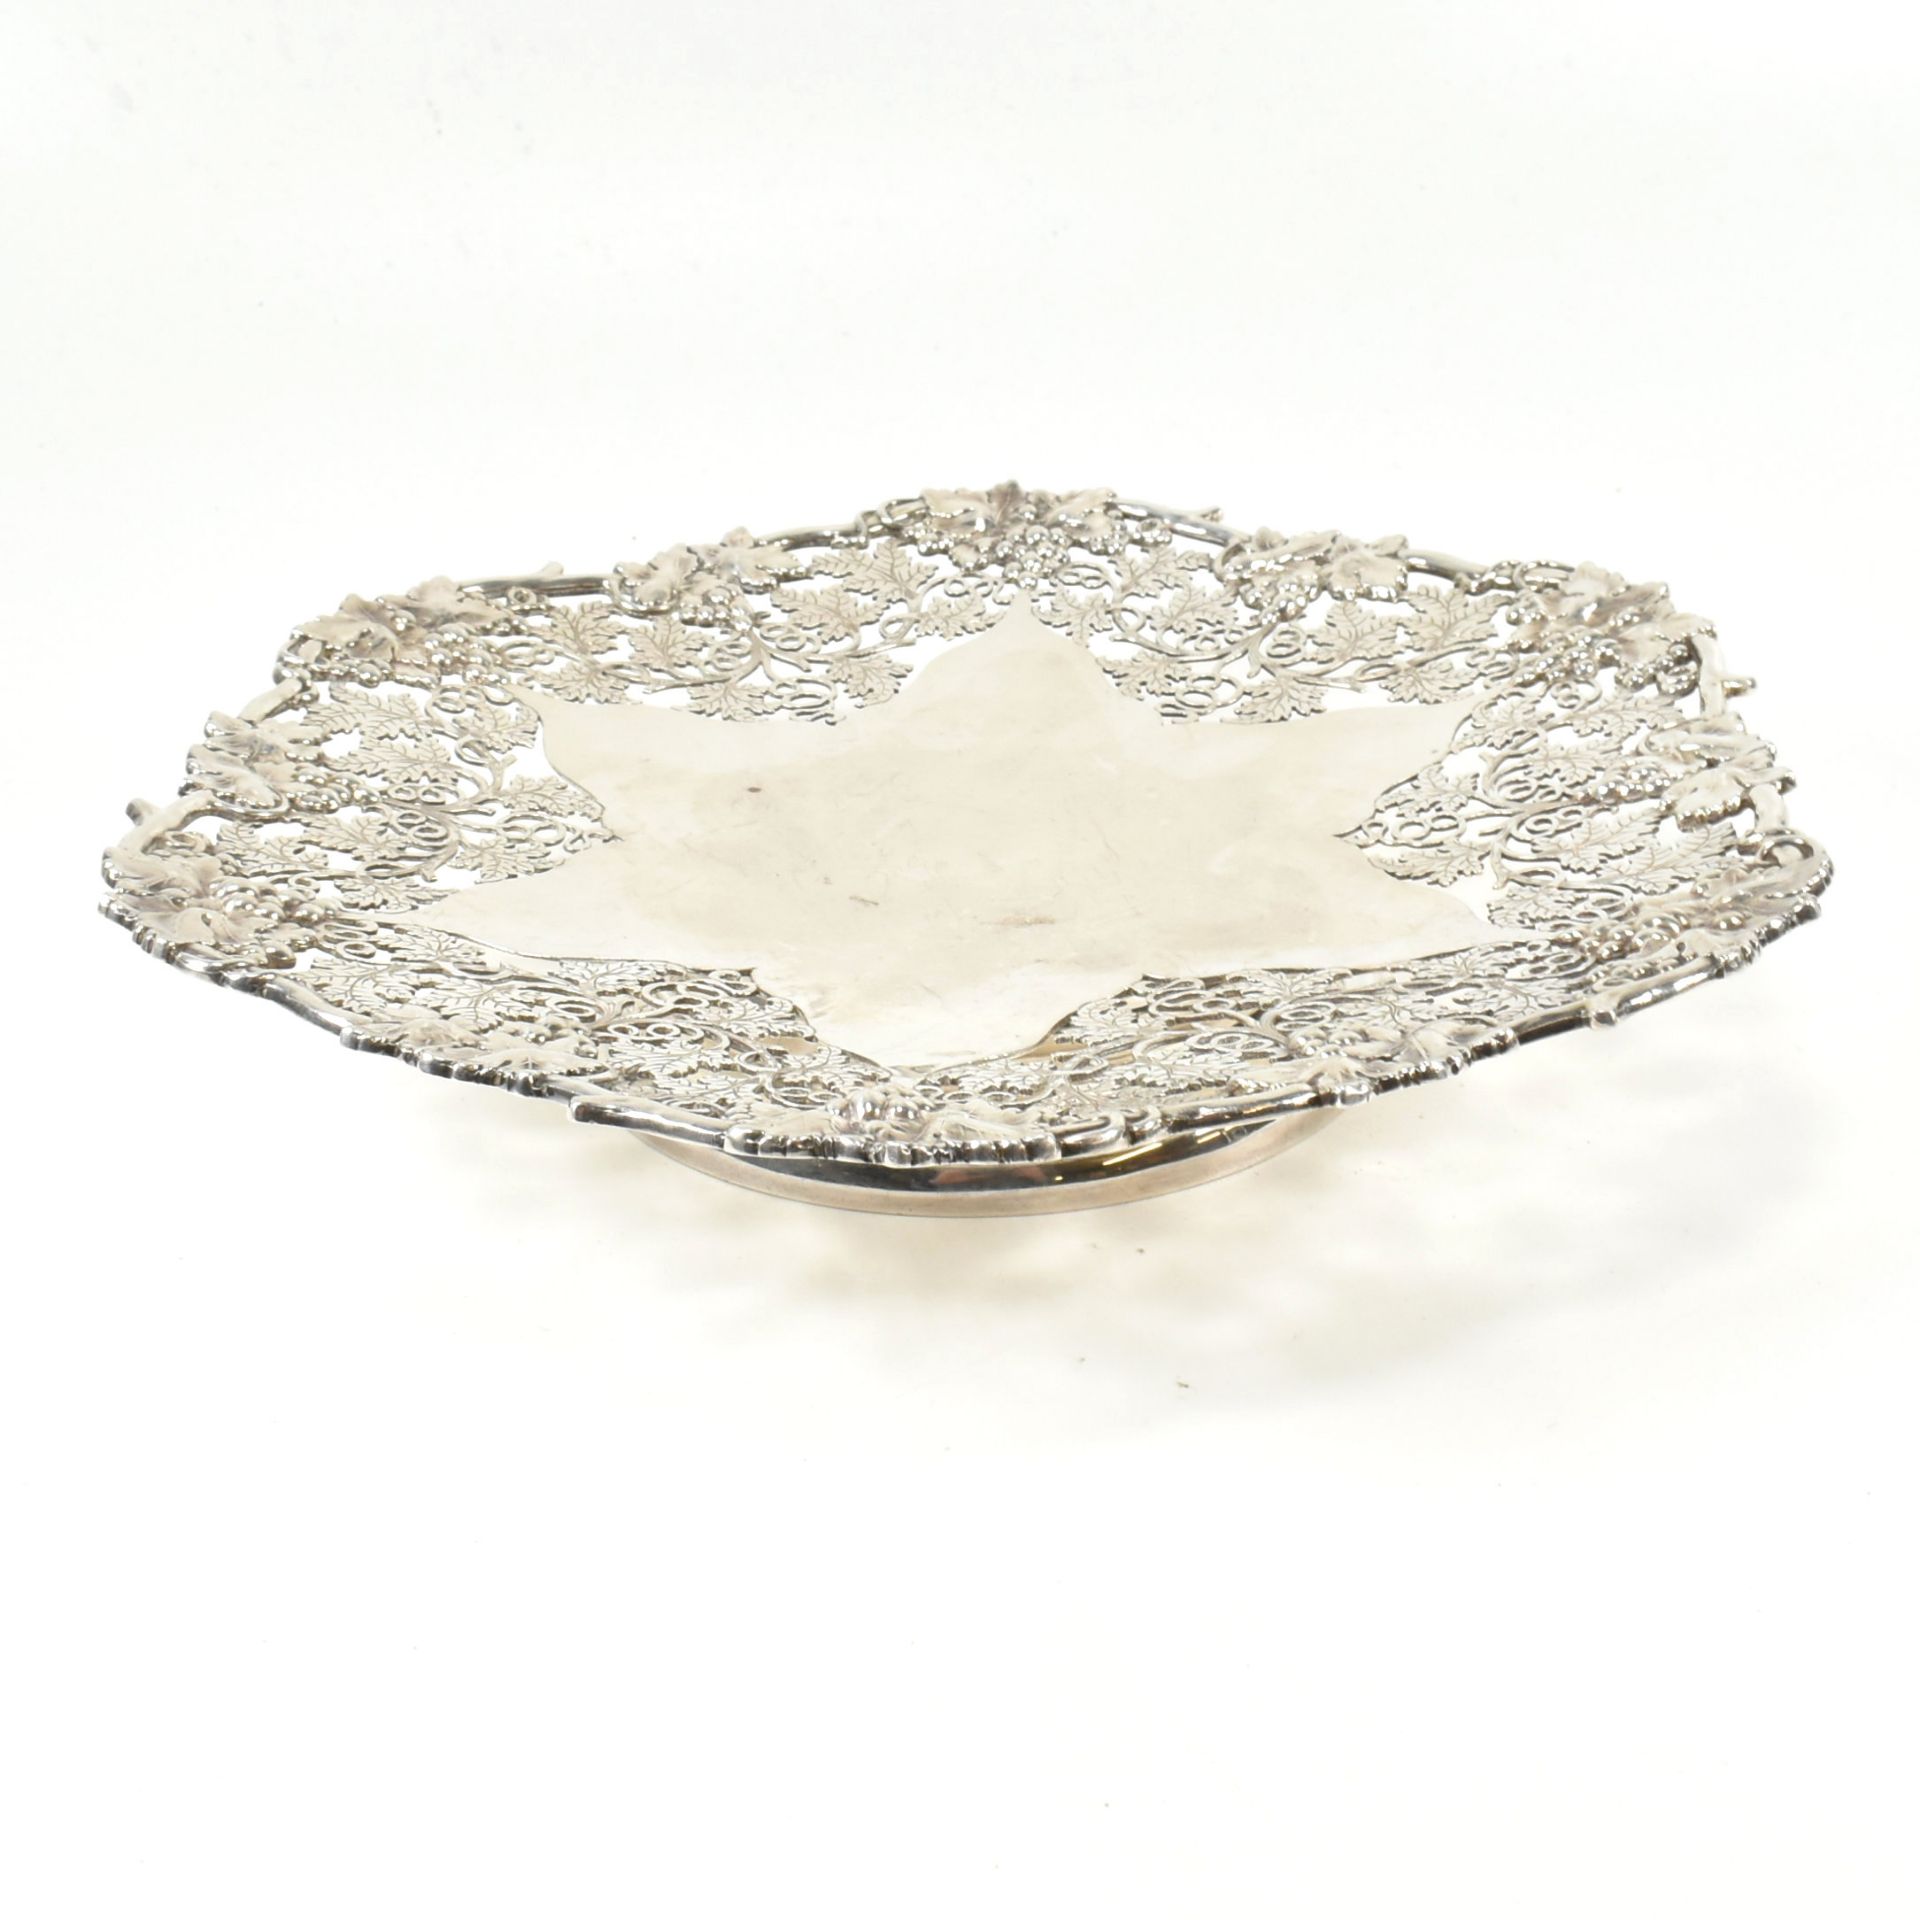 GEORGE V HALLMARKED SILVER COMPOTE - Image 2 of 10